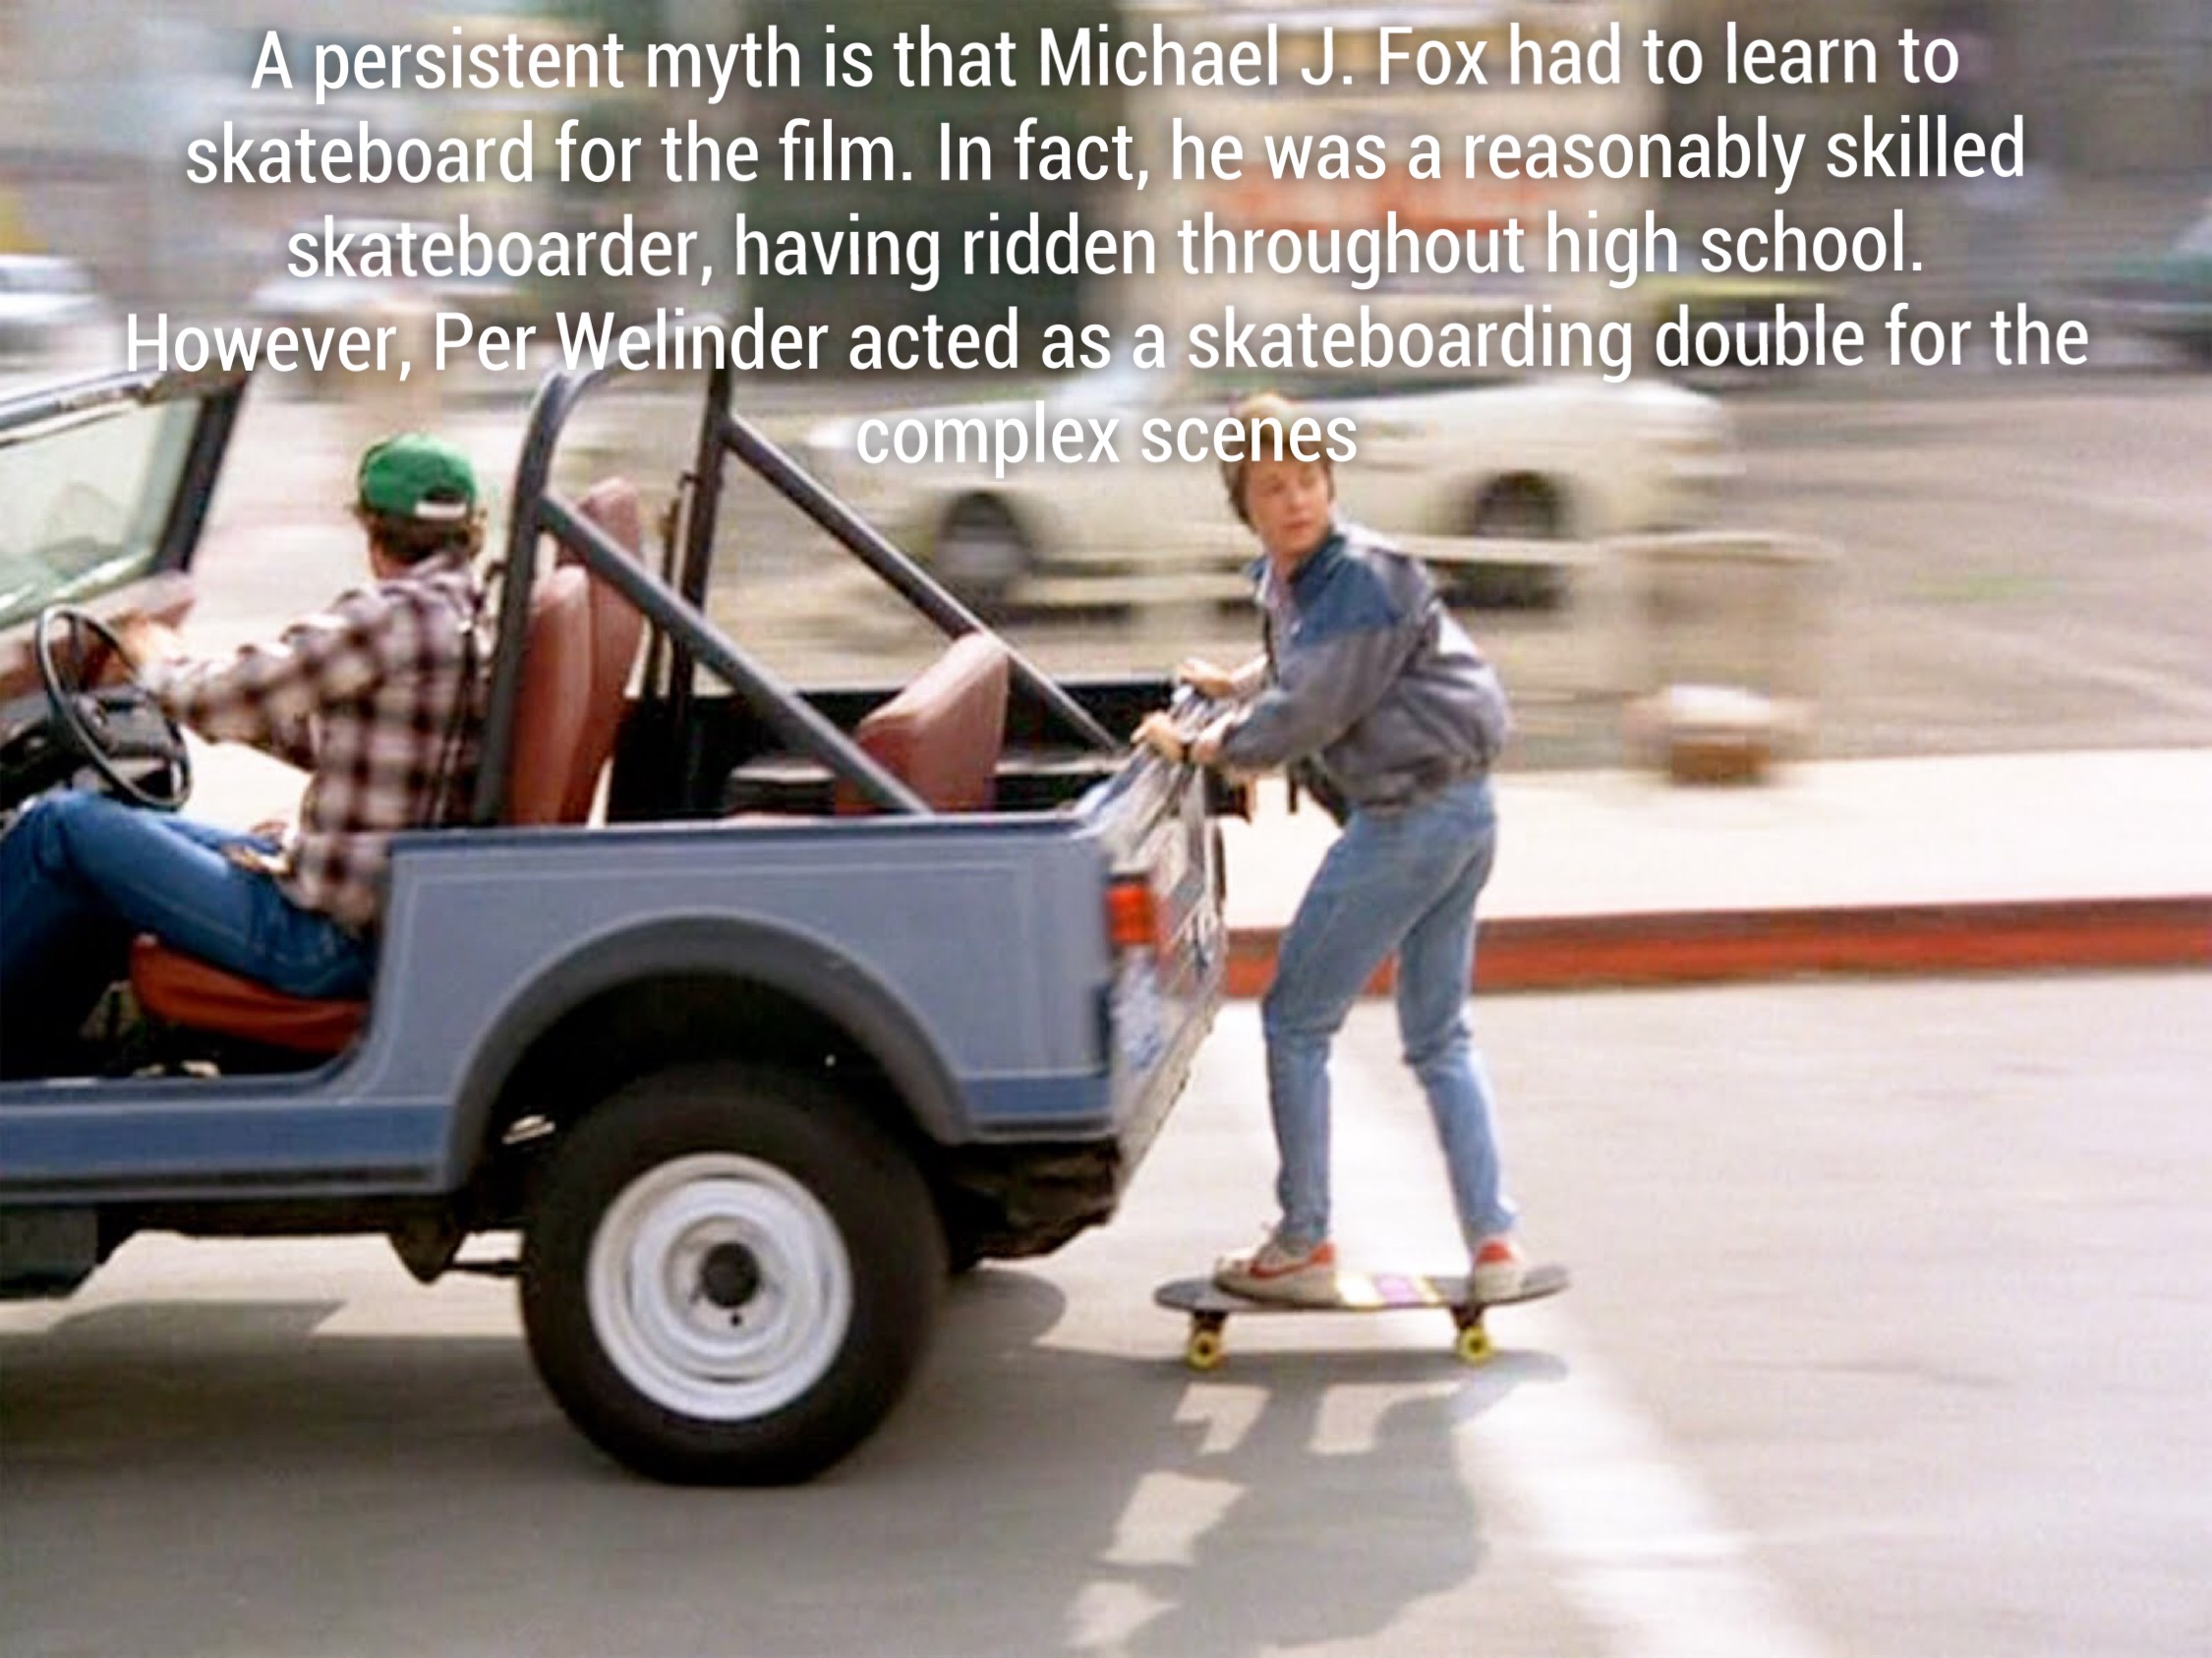 back to the future skateboard scene - A persistent myth is that Michael J. Fox had to learn to skateboard for the film. In fact, he was a reasonably skilled skateboarder, having ridden throughout high school. However, Per Welinder acted as a skateboarding